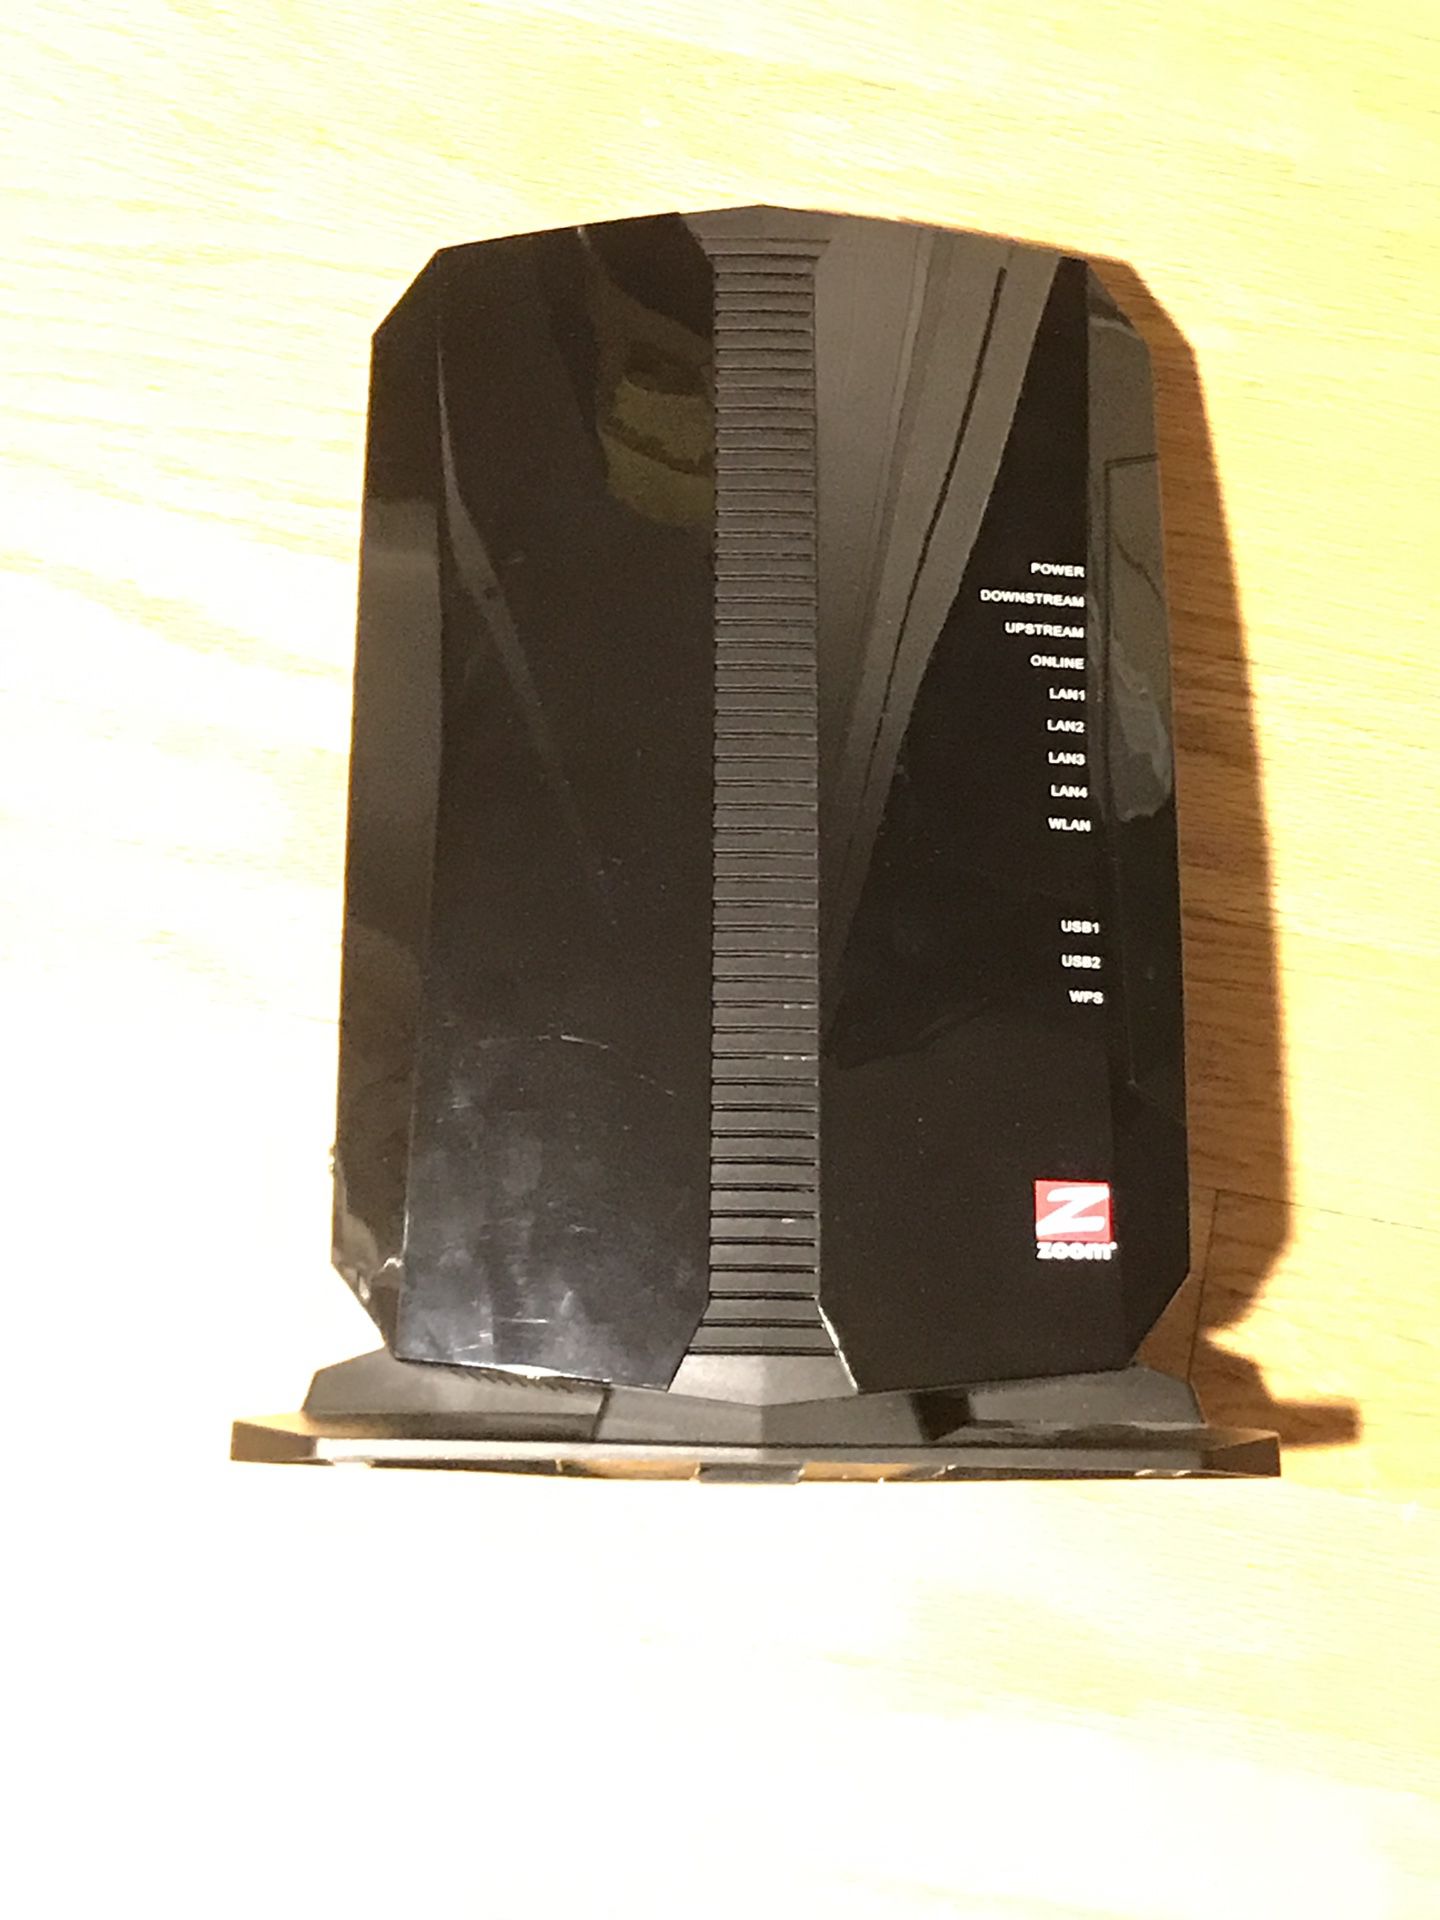 Xfinity modem and router in one